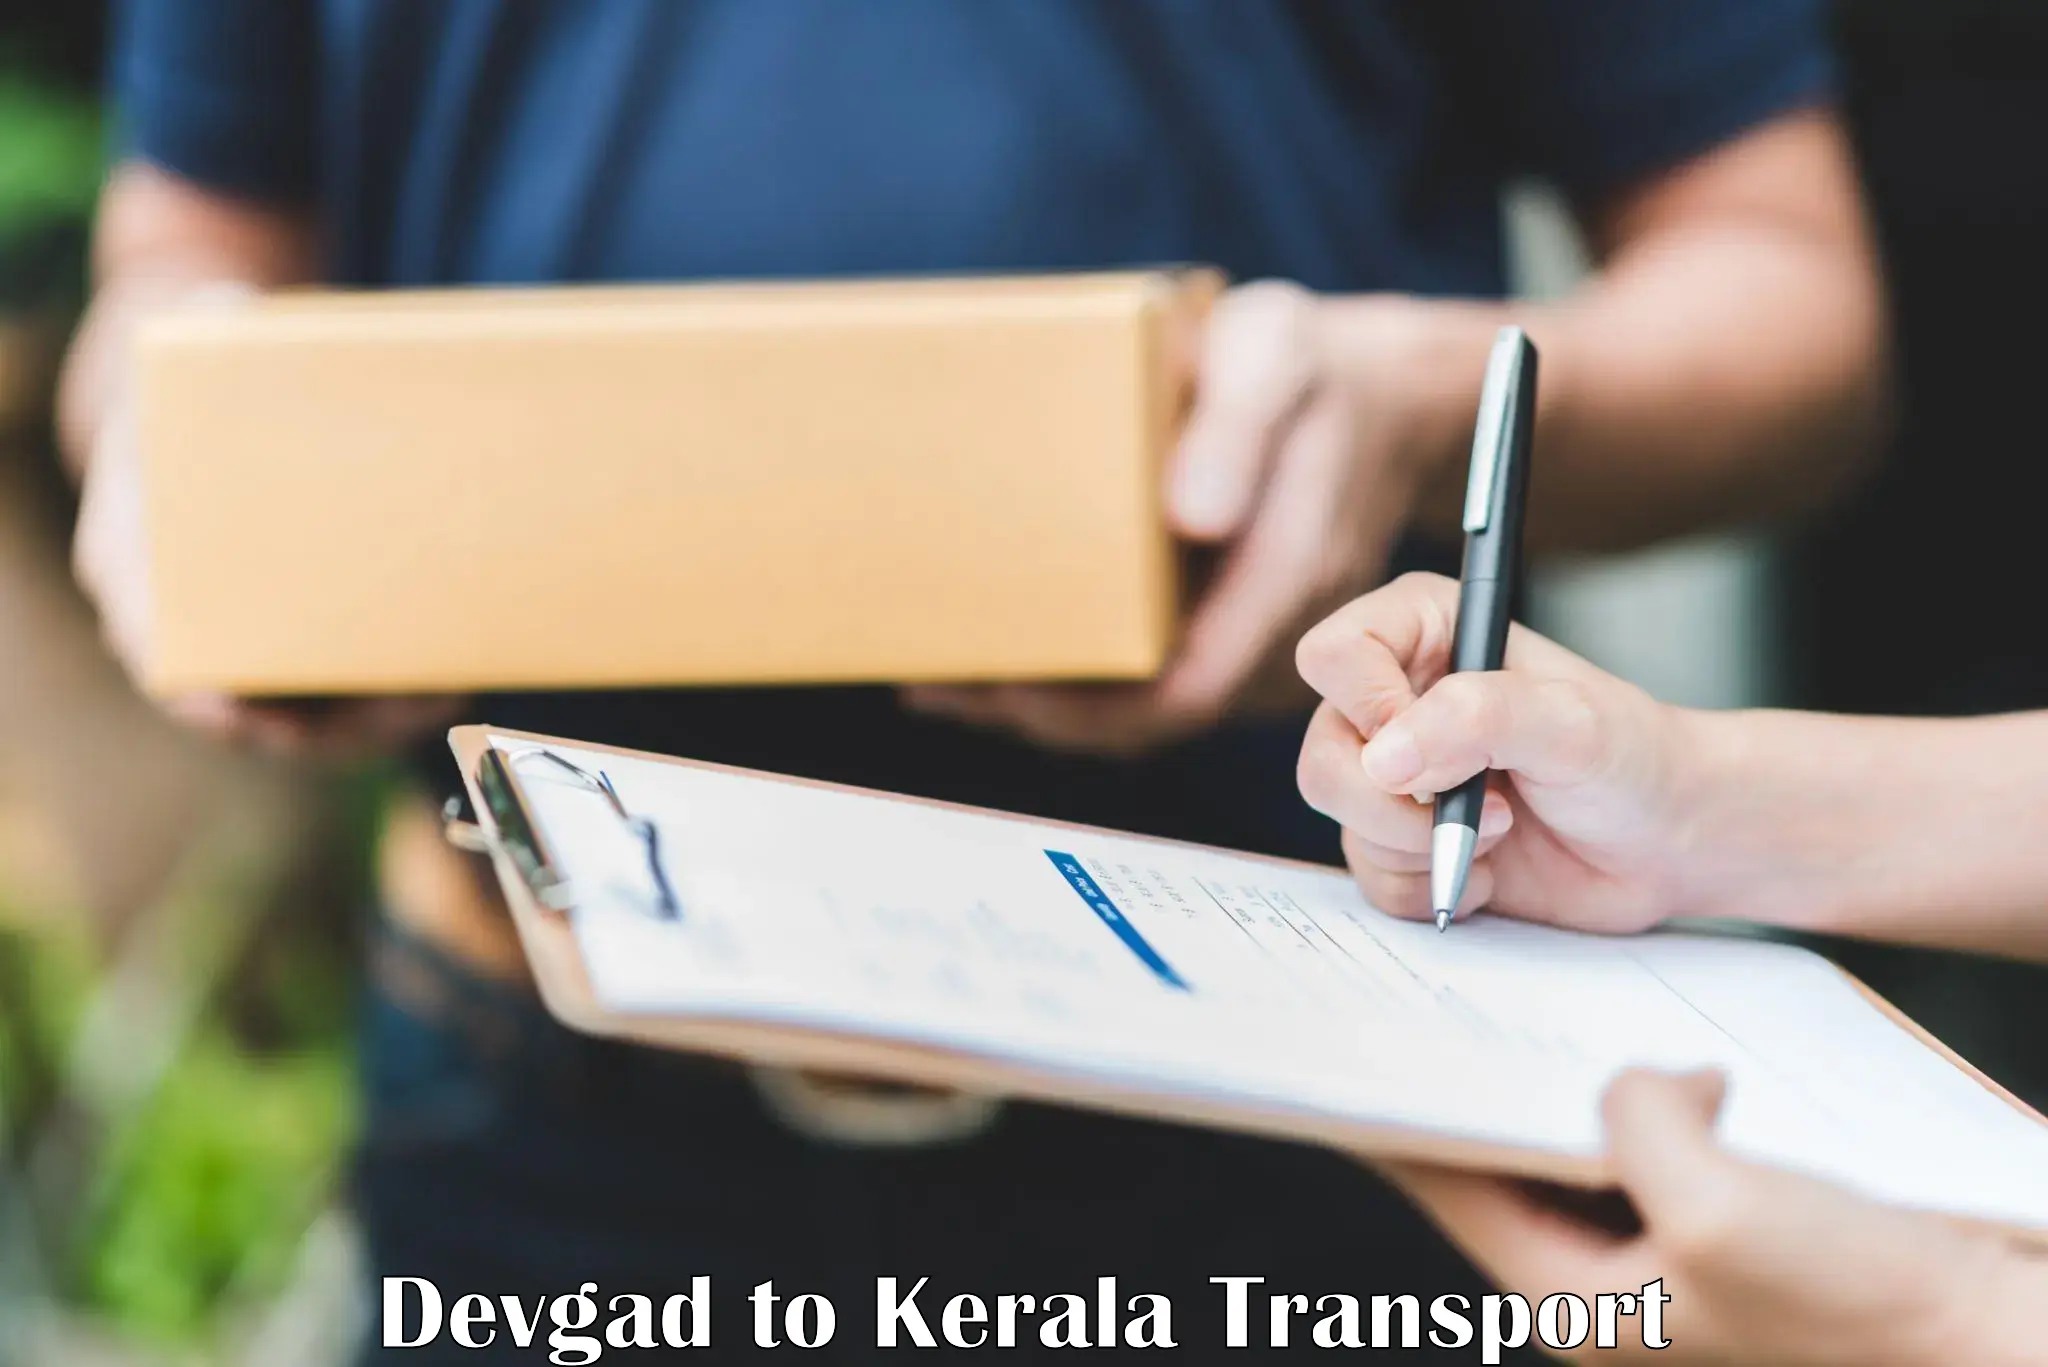 Commercial transport service Devgad to Cochin